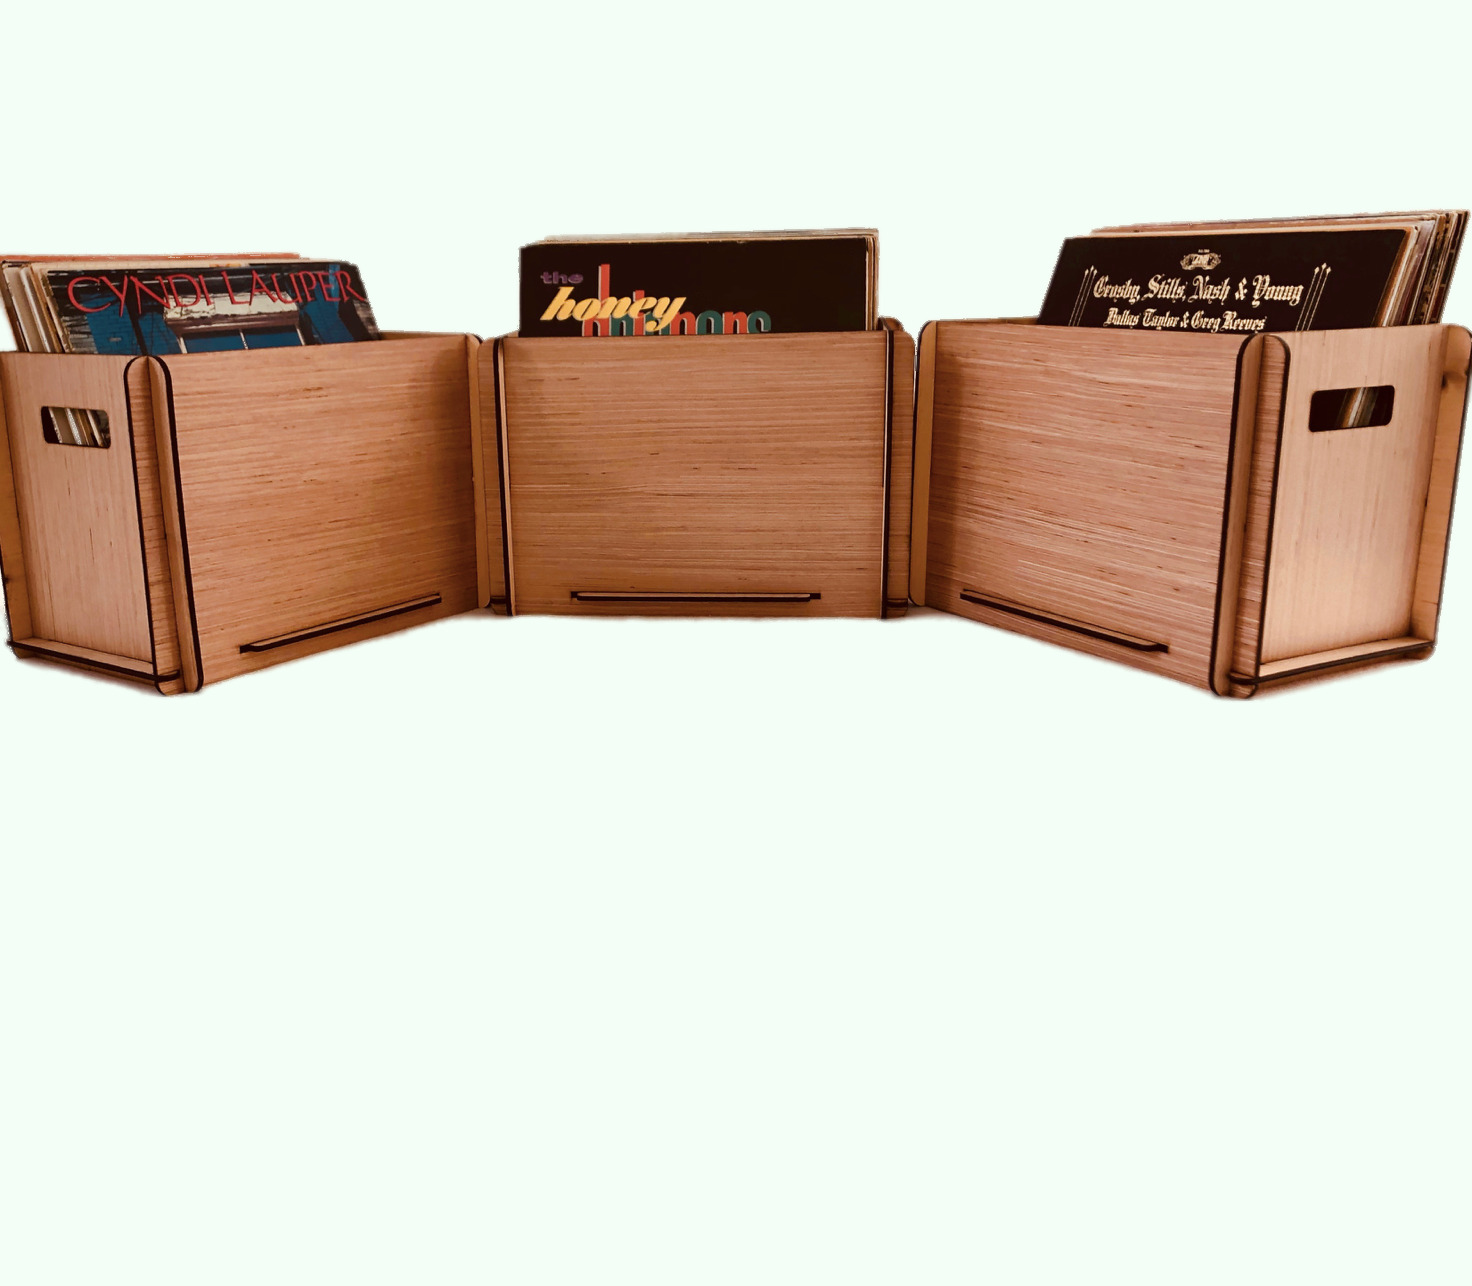 Three Romany House Vinyl Record Storage Crates - For the Serious Collector